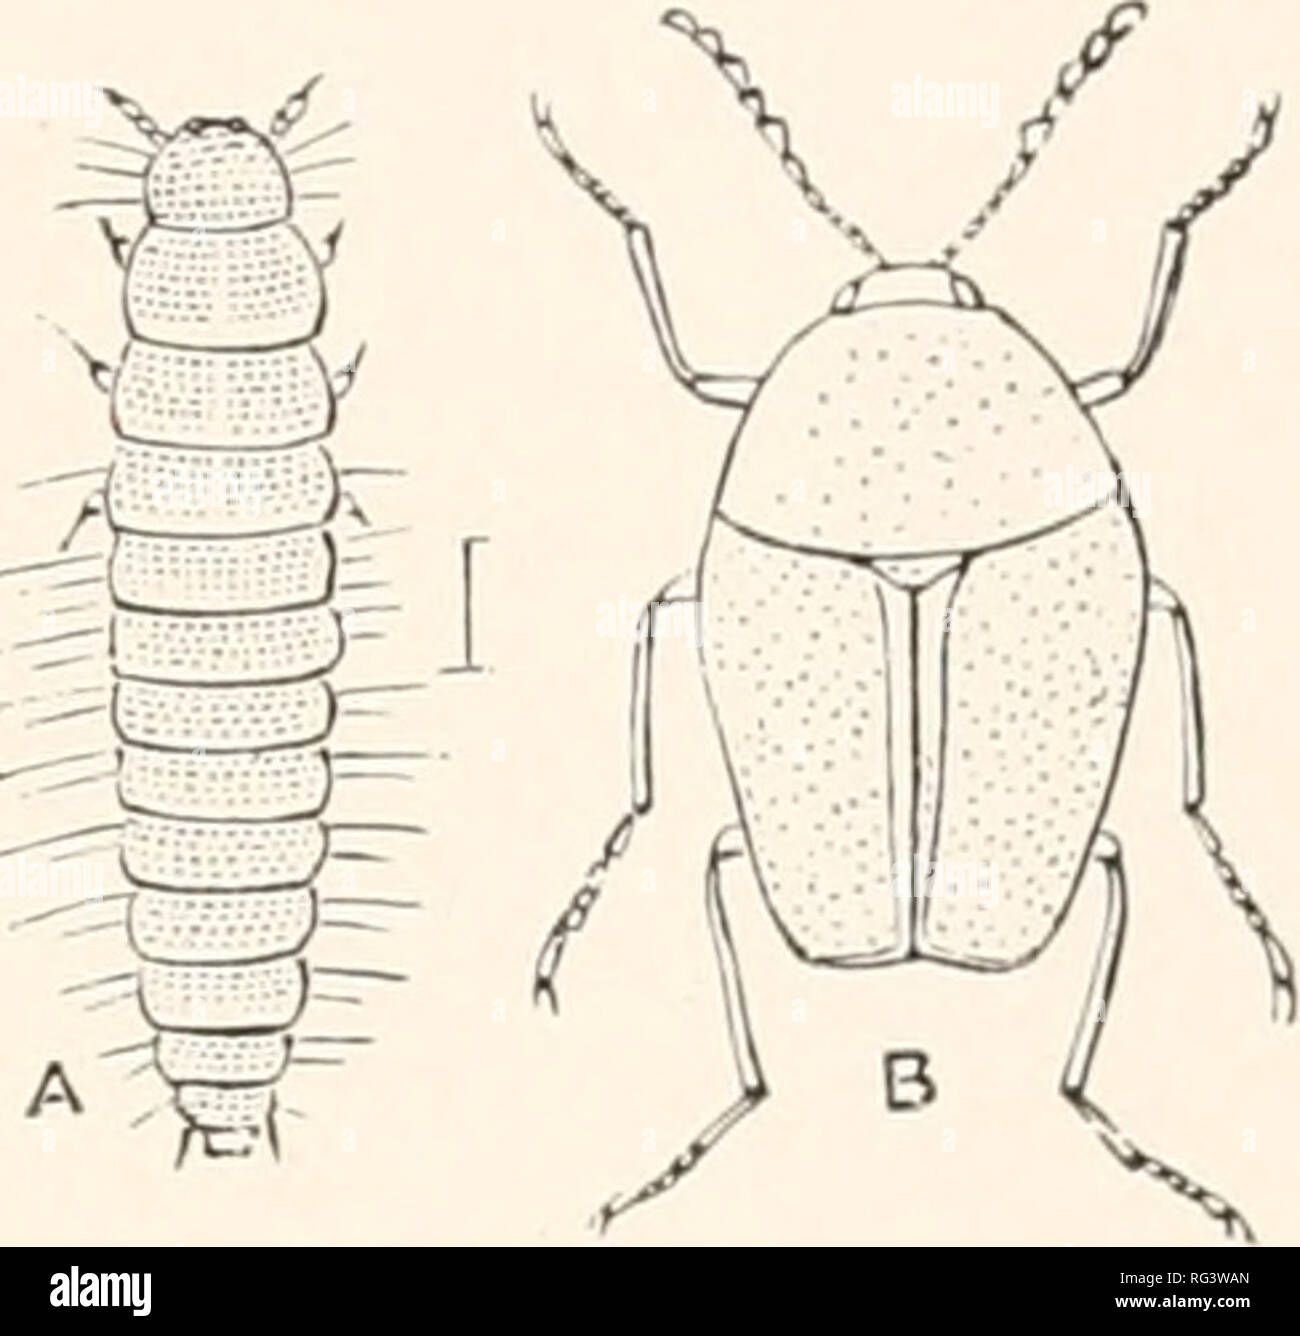 . The Cambridge natural history. Zoology. POLYMORPRA SCAPHIDIIDAE—SYNTELIIDAE 229 Fam. 24. Scaphidiidae.—Front coxae small, conical; prothorax very closely applied to the after-body ; bind coxae transverse, witlcl;/ separated: abdomen with six or seven visible ventral plates; antennae at the extremity with about Jive joints that become &lt;l fa dually broader. Tarsi Jive-jointed. This family consists of a few beetles mat live in fungi, and run with extreme rapidity ; they are all small, and usually rare in collections. Some of the exotic forms are remarkable for the ex- treme tenuity and fragi Stock Photo